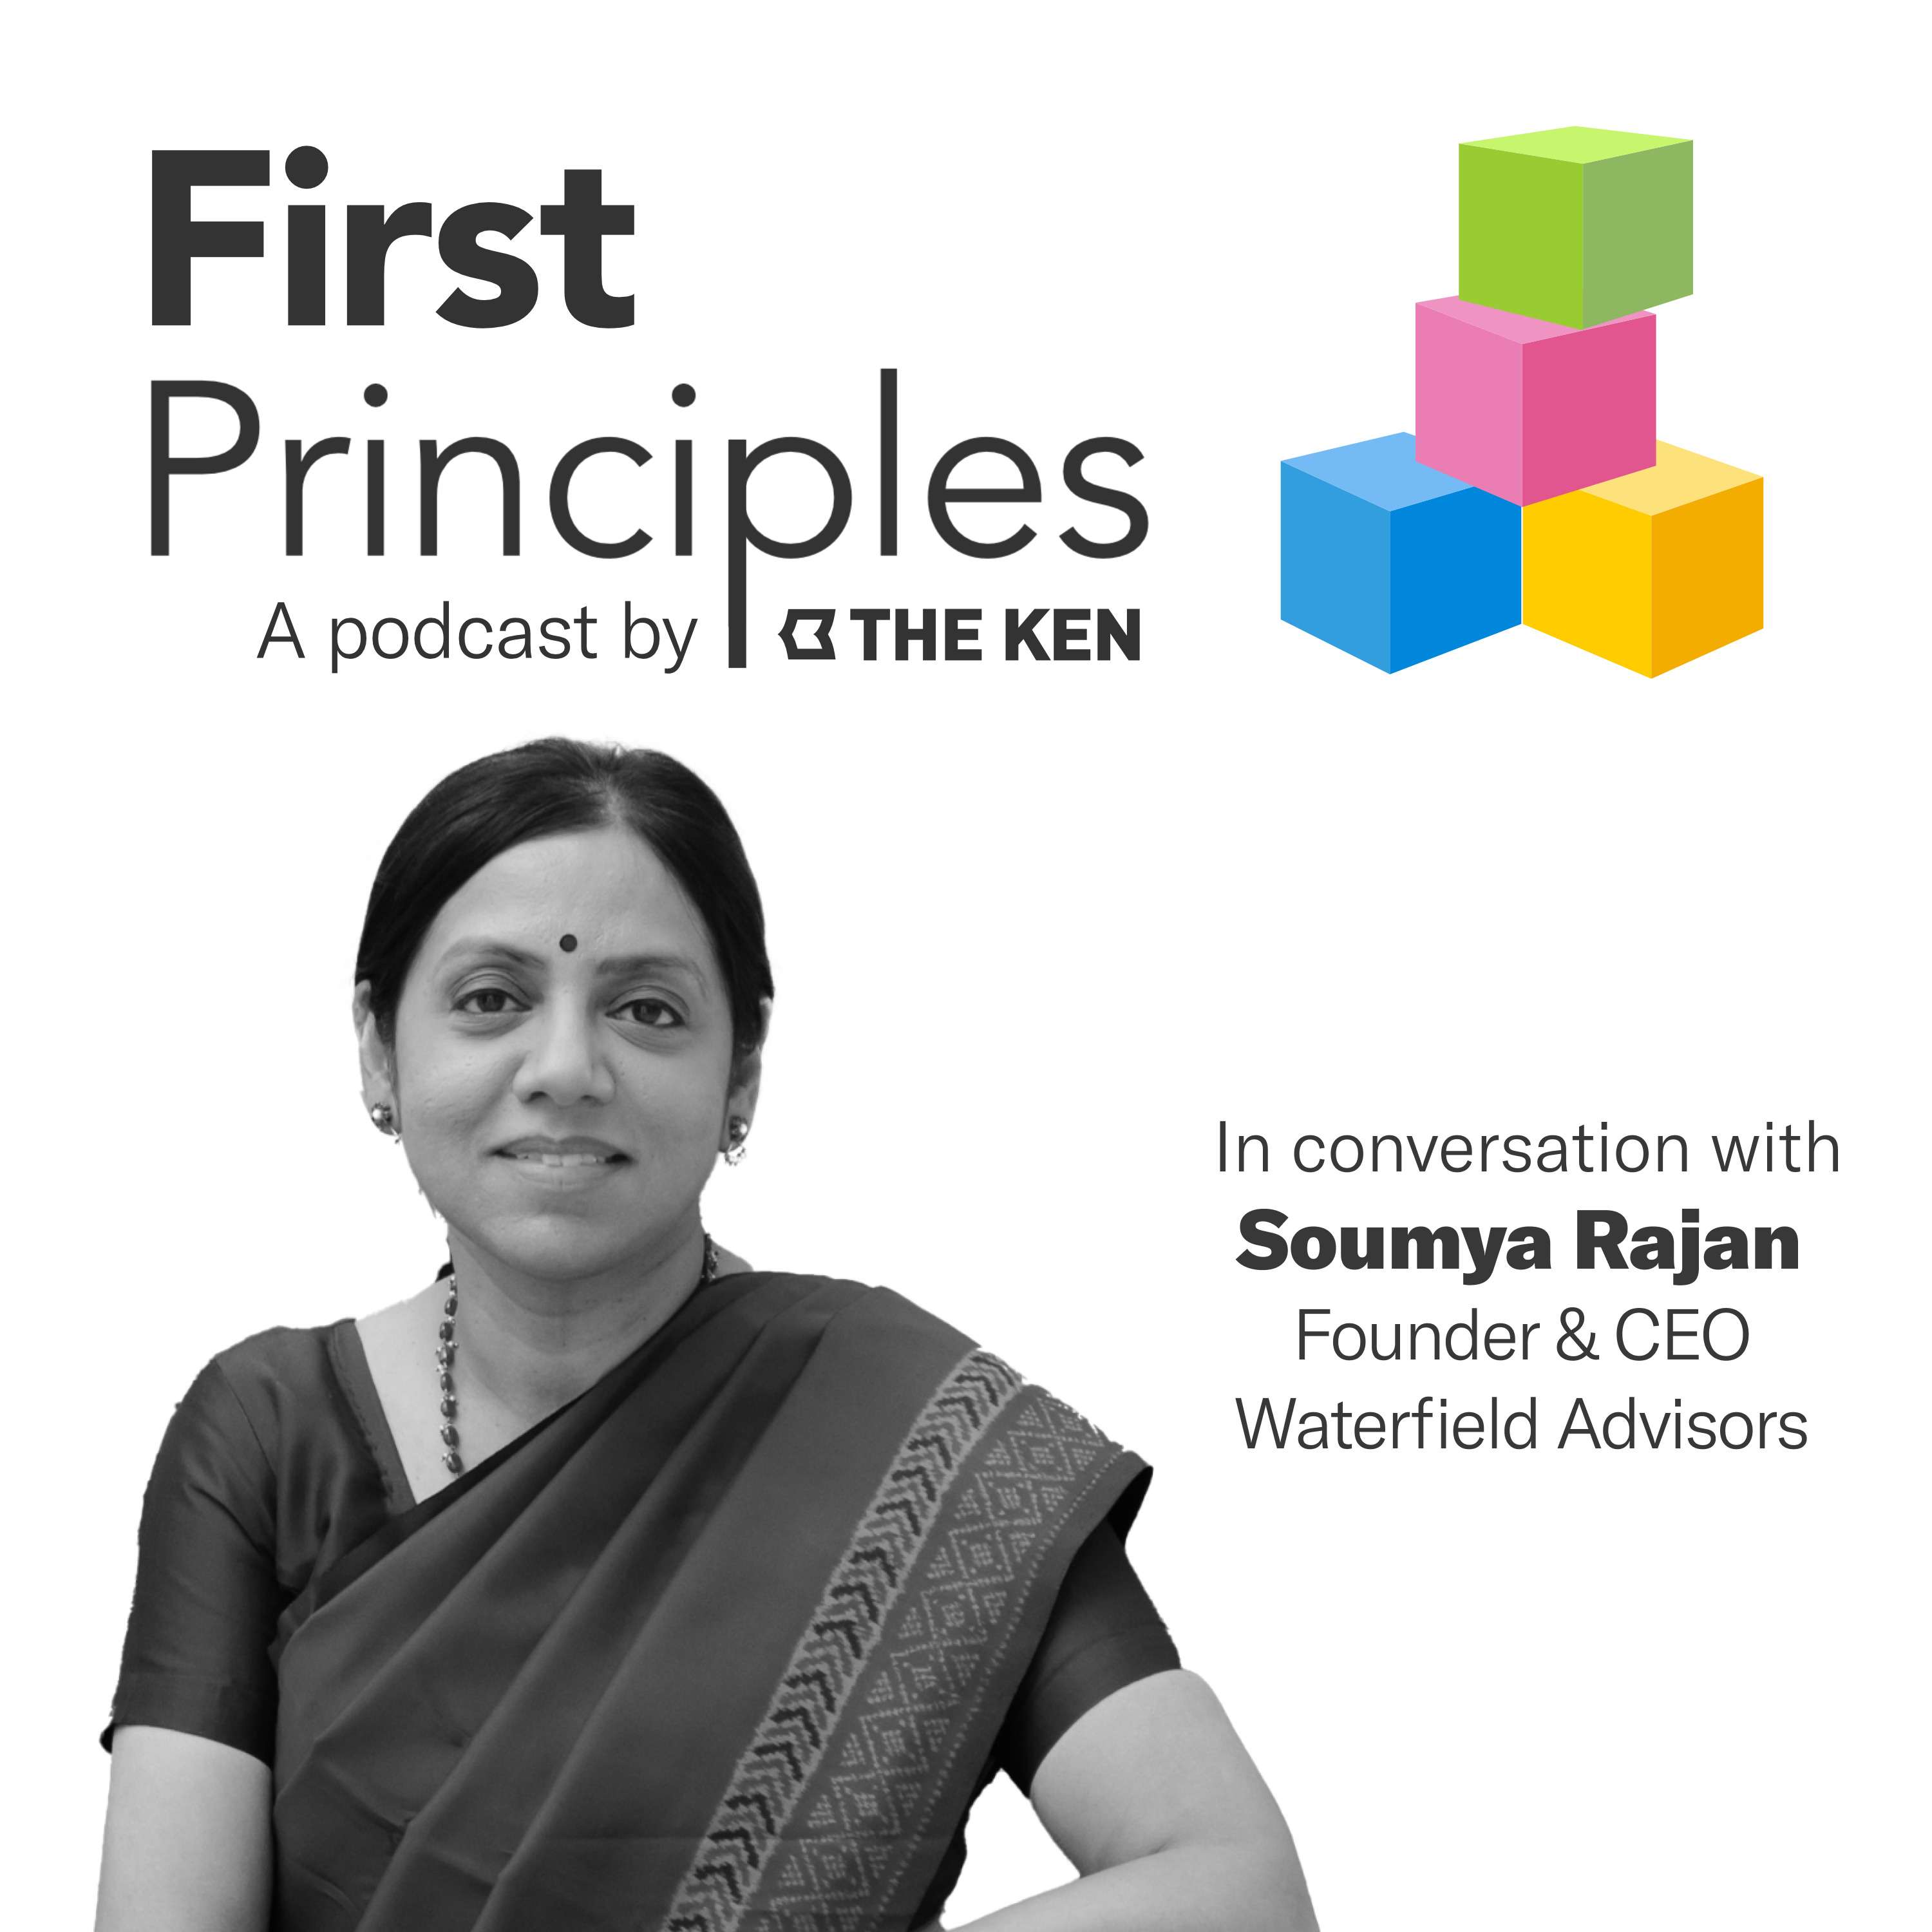 Soumya Rajan of Waterfield Advisors on turning a 'sceptical' idea into a resilient business